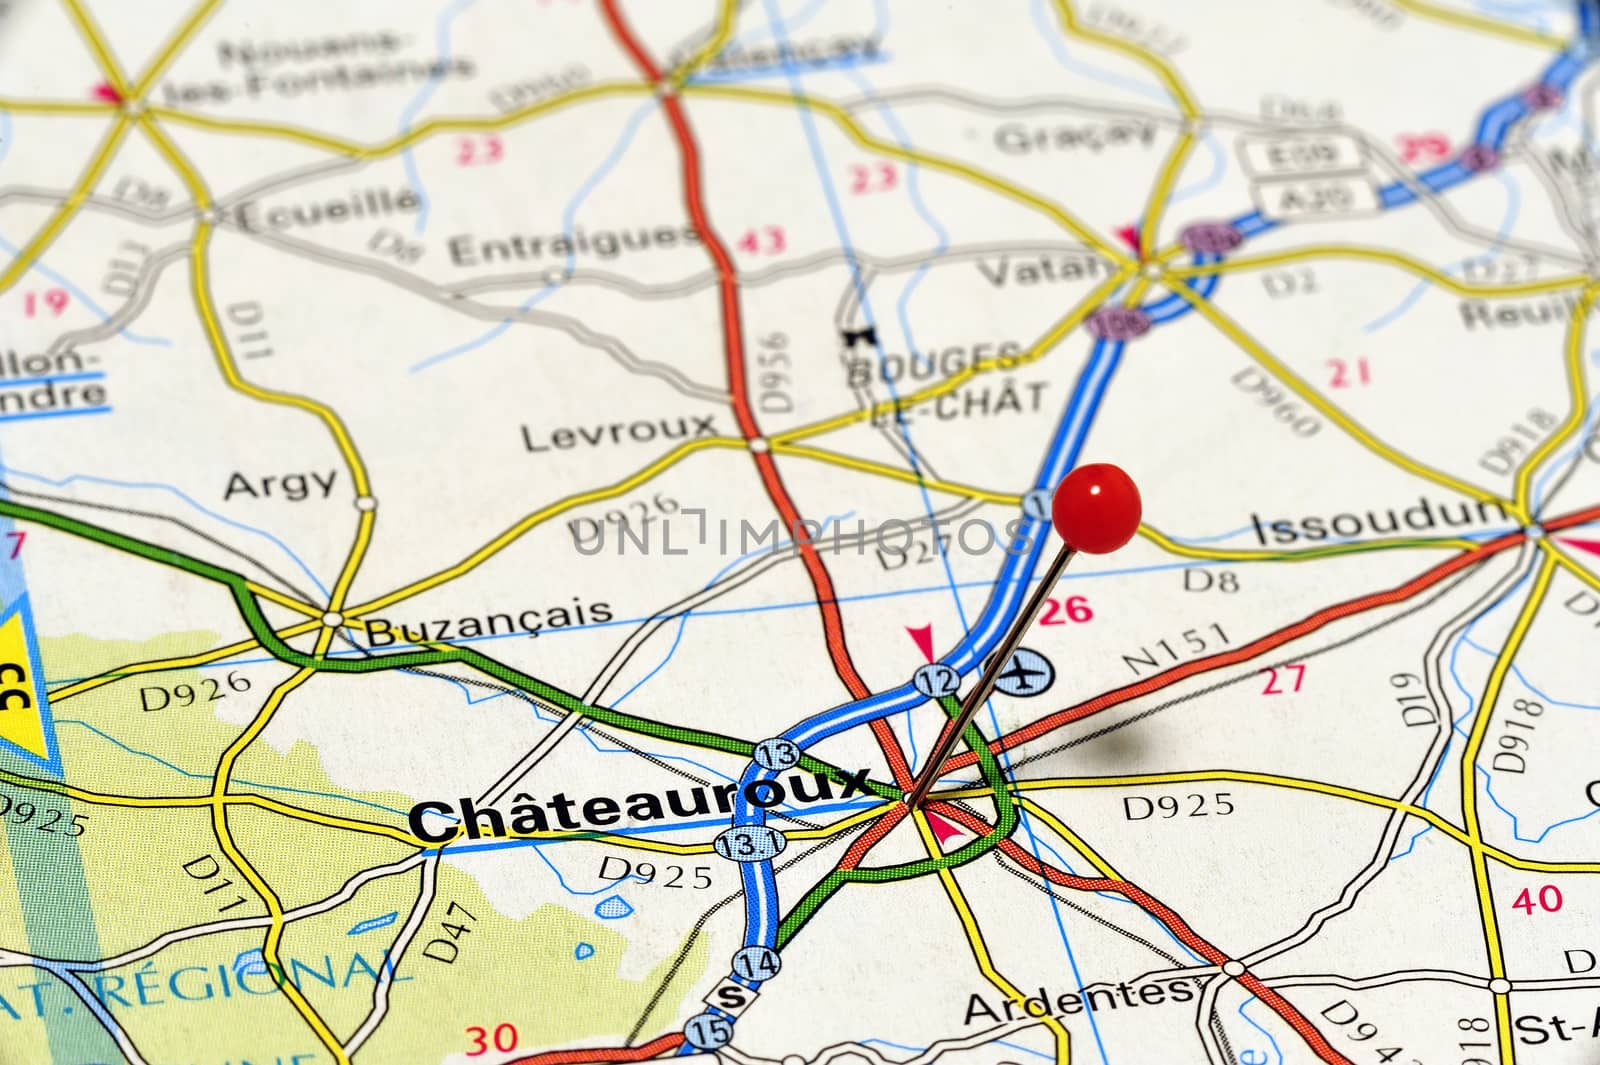 Closeup map of Chateauroux. Chateauroux is a French municipality and the prefecture of the Indre, Centre region.